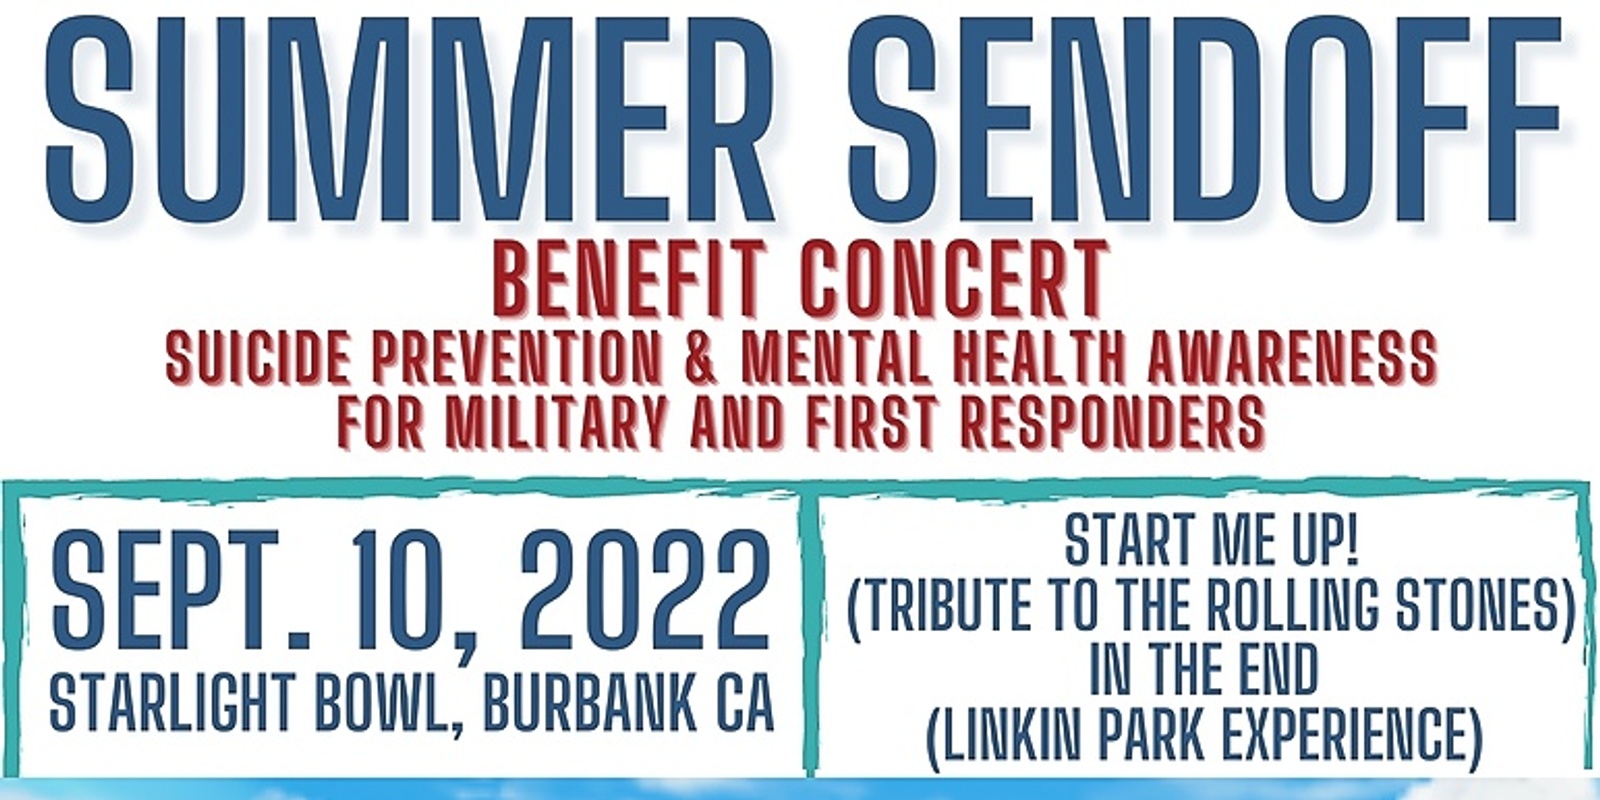 Banner image for Summer Sendoff - Benefit Concert for Suicide Prevention Awareness for Military and First Responders (feat. In The End - A Linkin Park Experience AND Start Me Up! - A Tribute to the Rolling Stones)